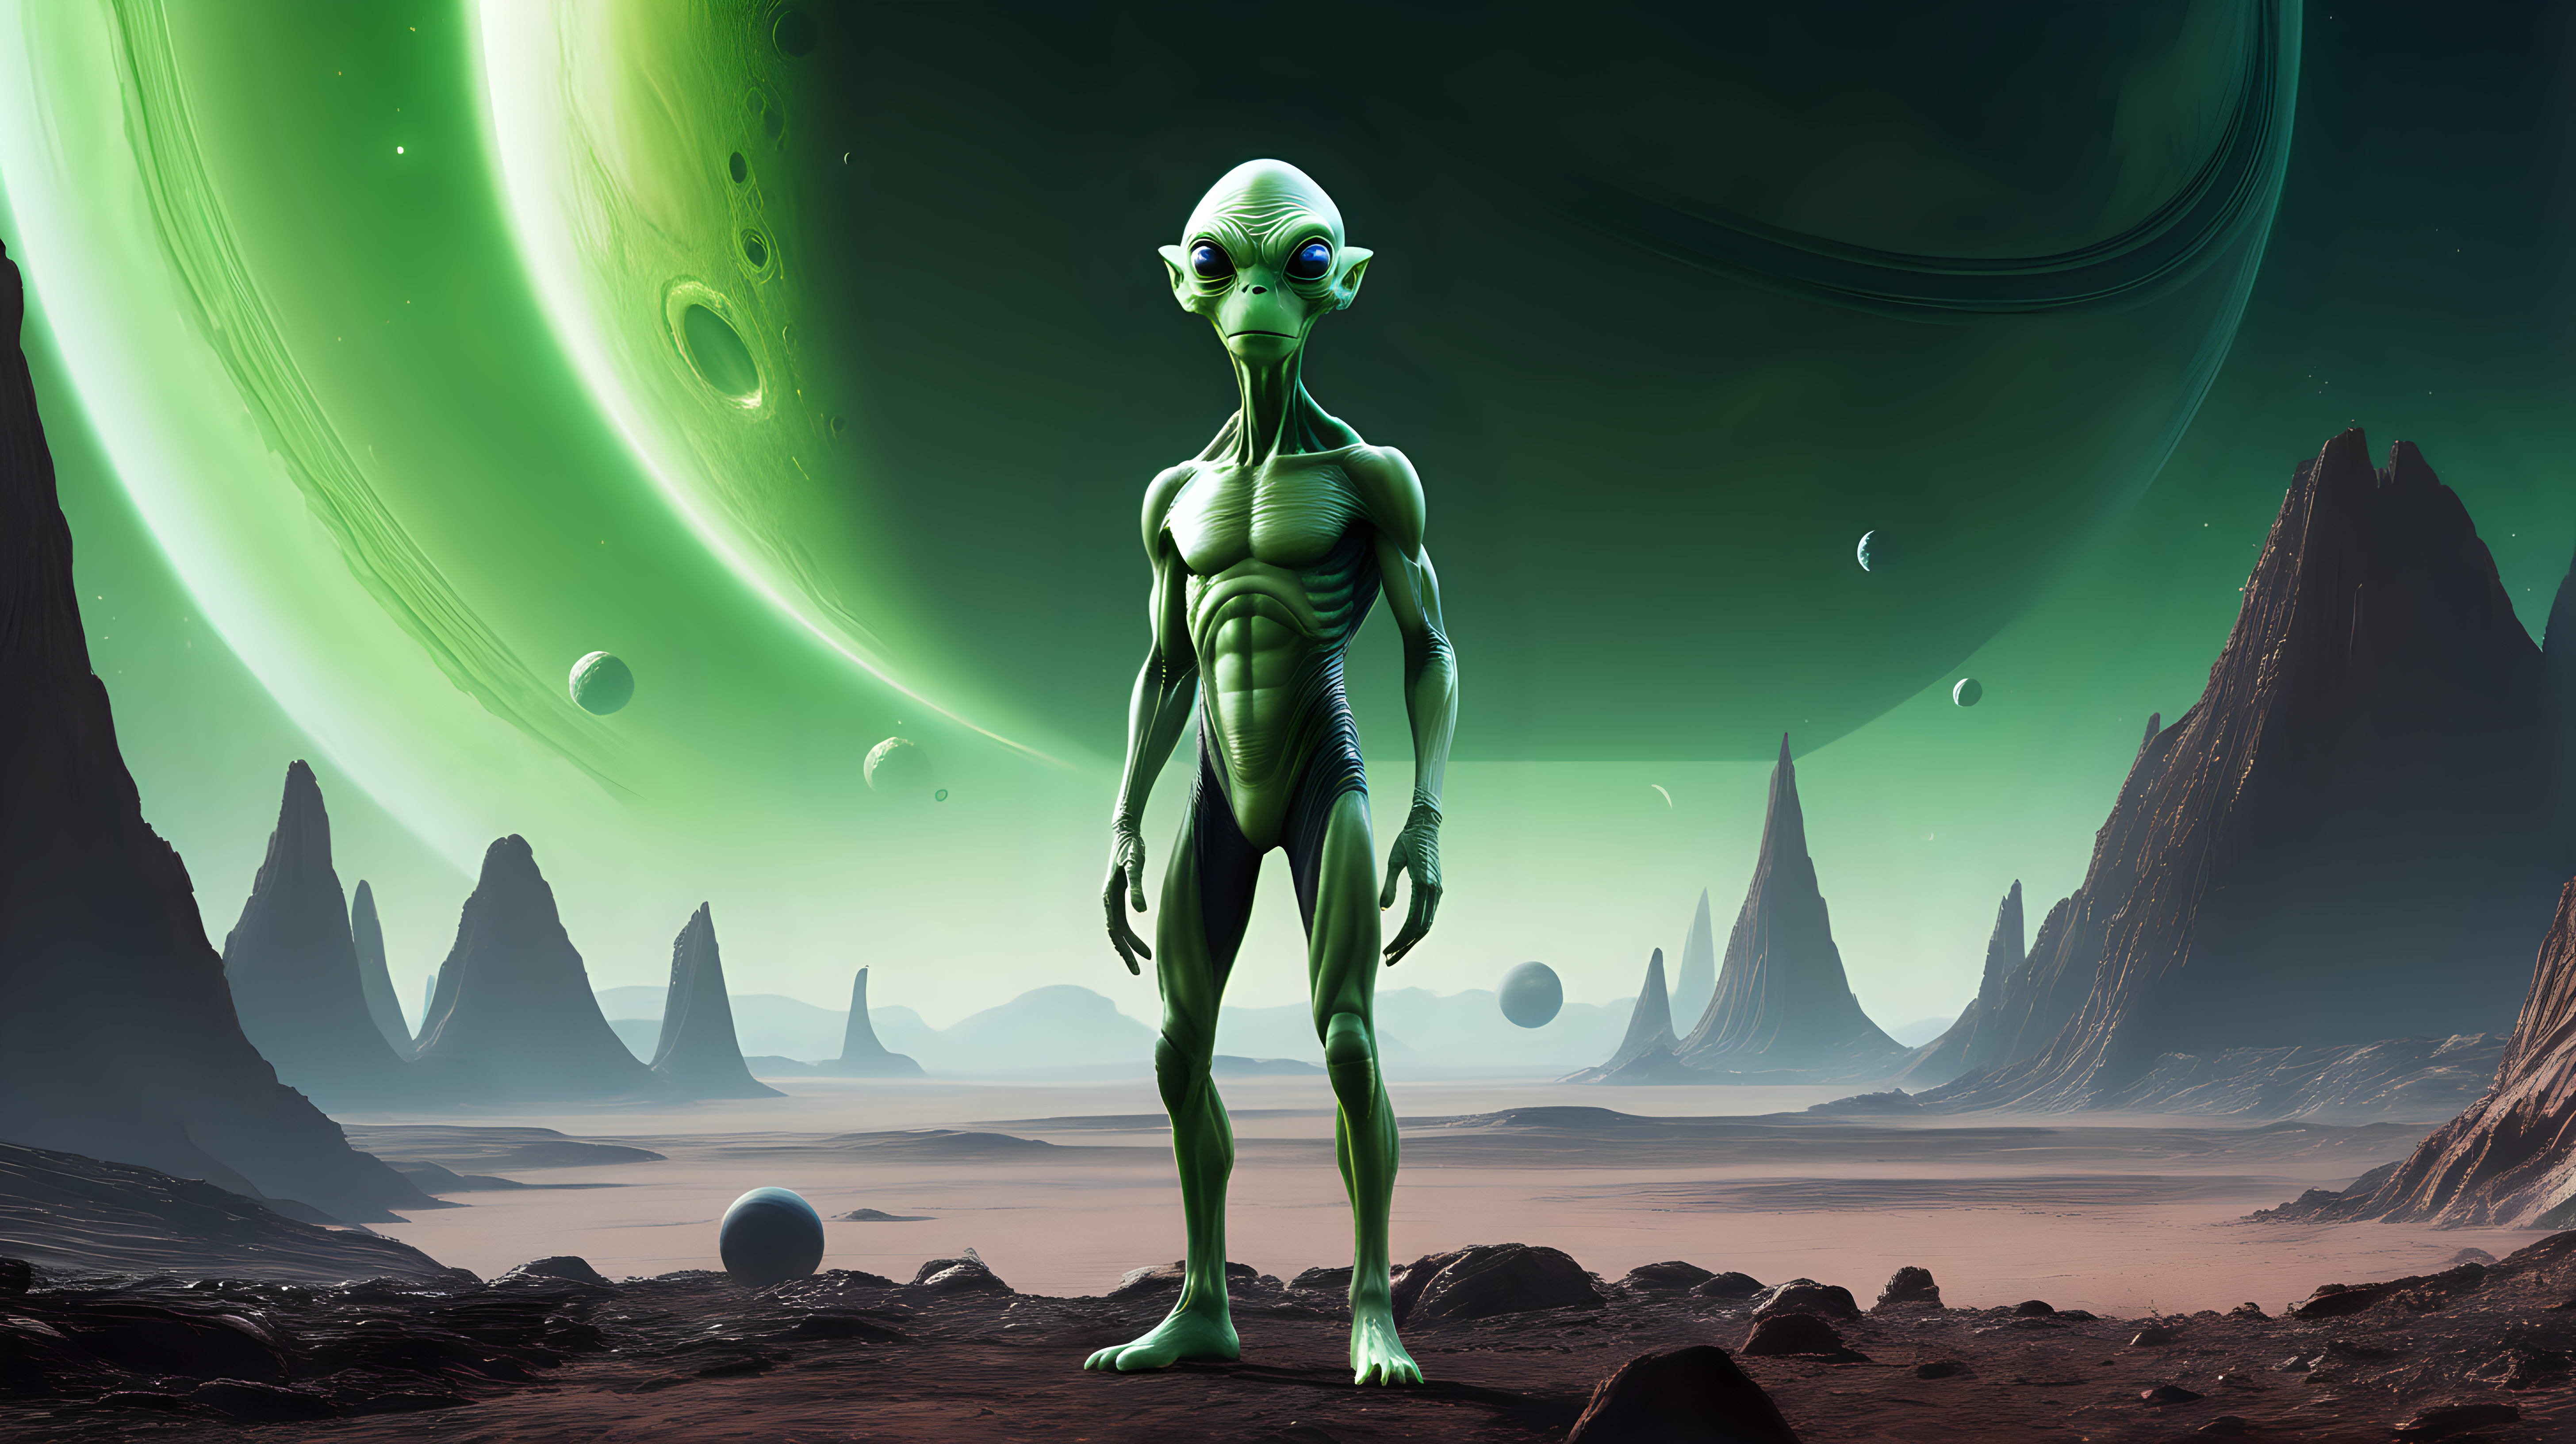 A green alien in the foreground on an alien planet, a ringed planet in the sky behind him.